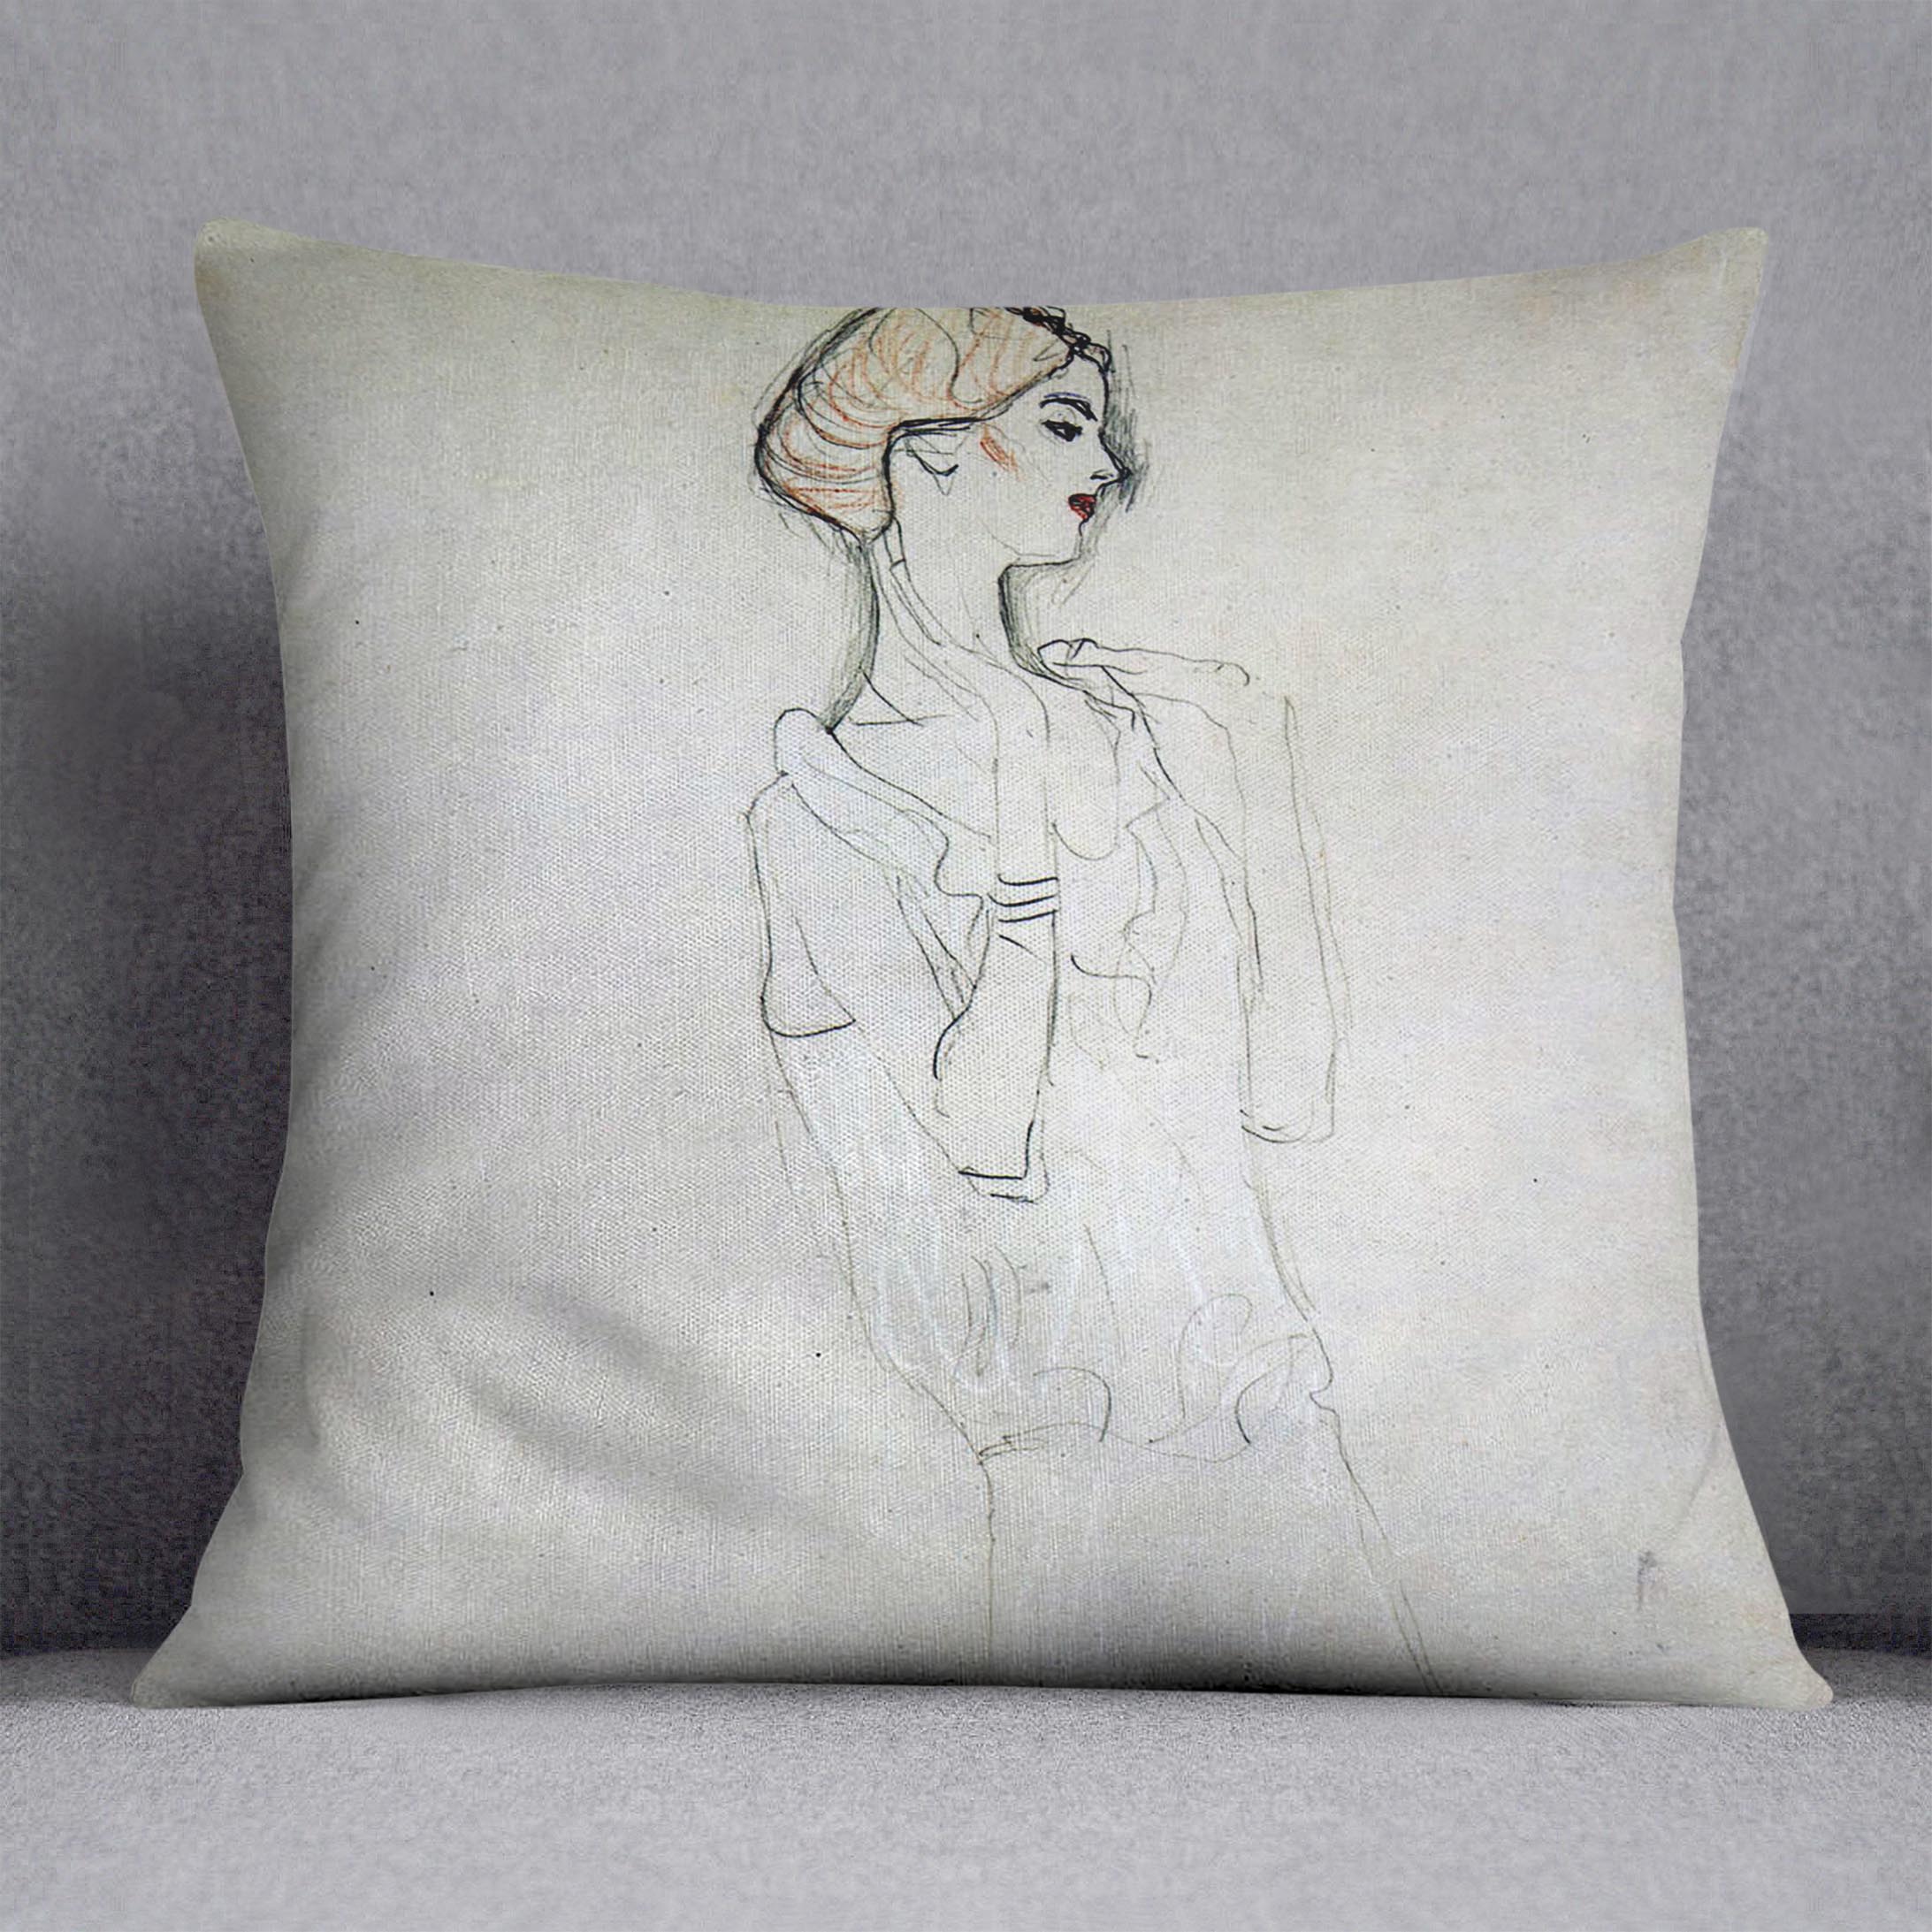 Profile standing female figure with raised arms by Klimt Cushion